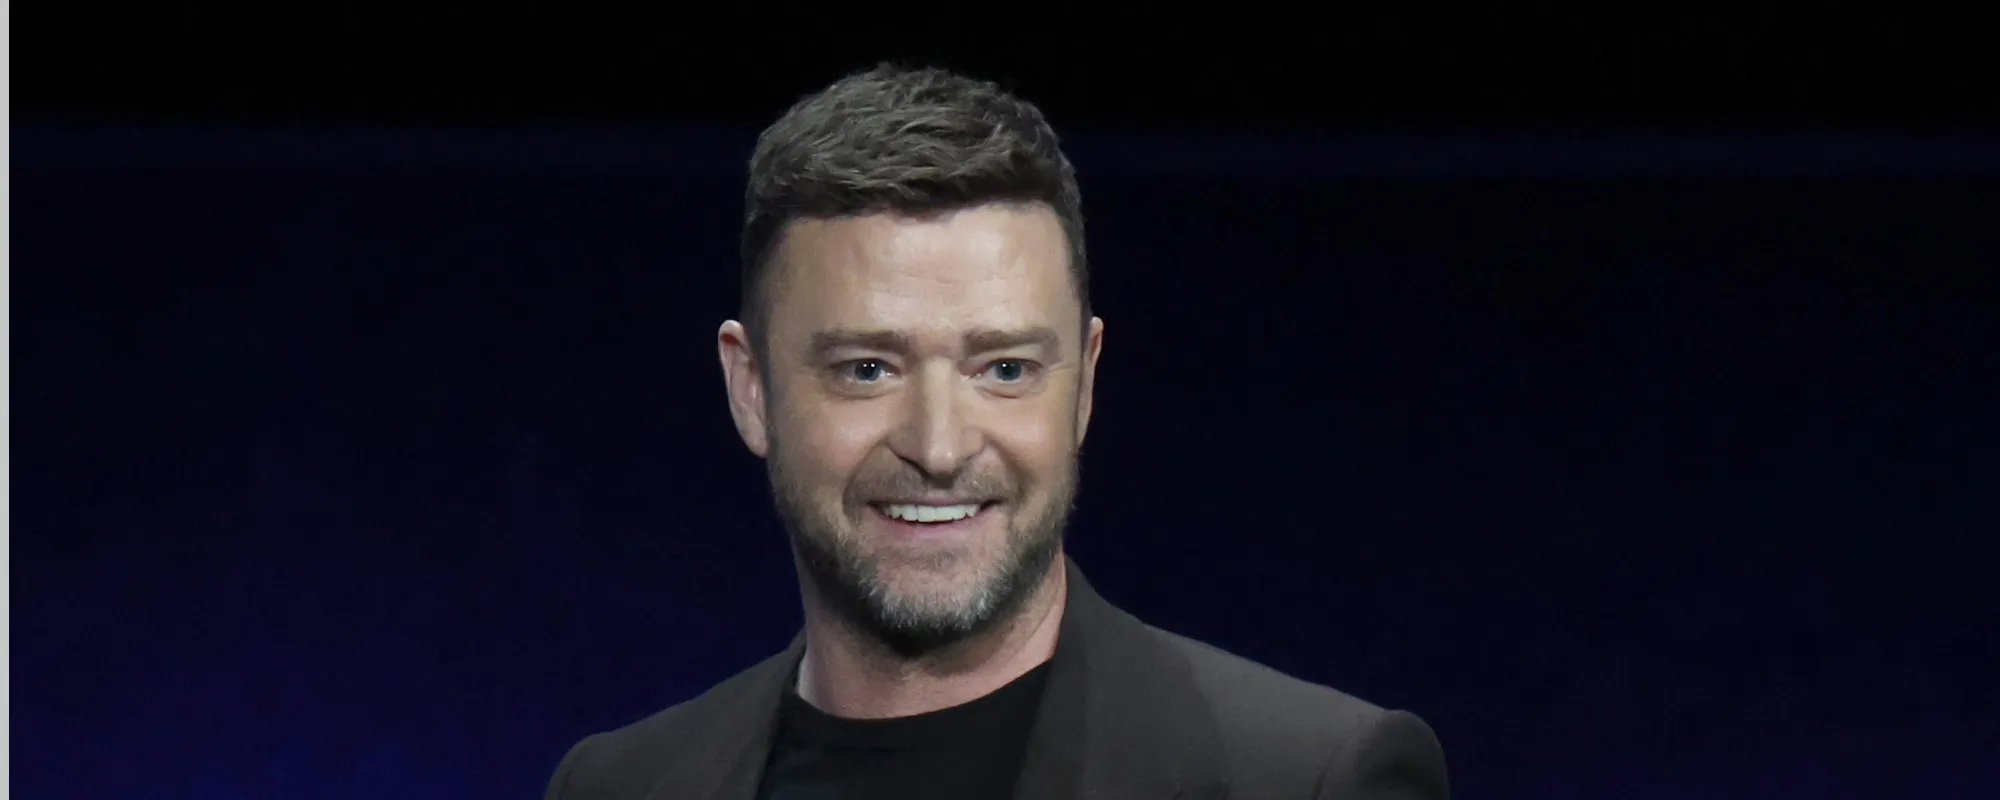 Did You Know? Justin Timberlake’s “Rock Your Body” Almost Went to Michael Jackson